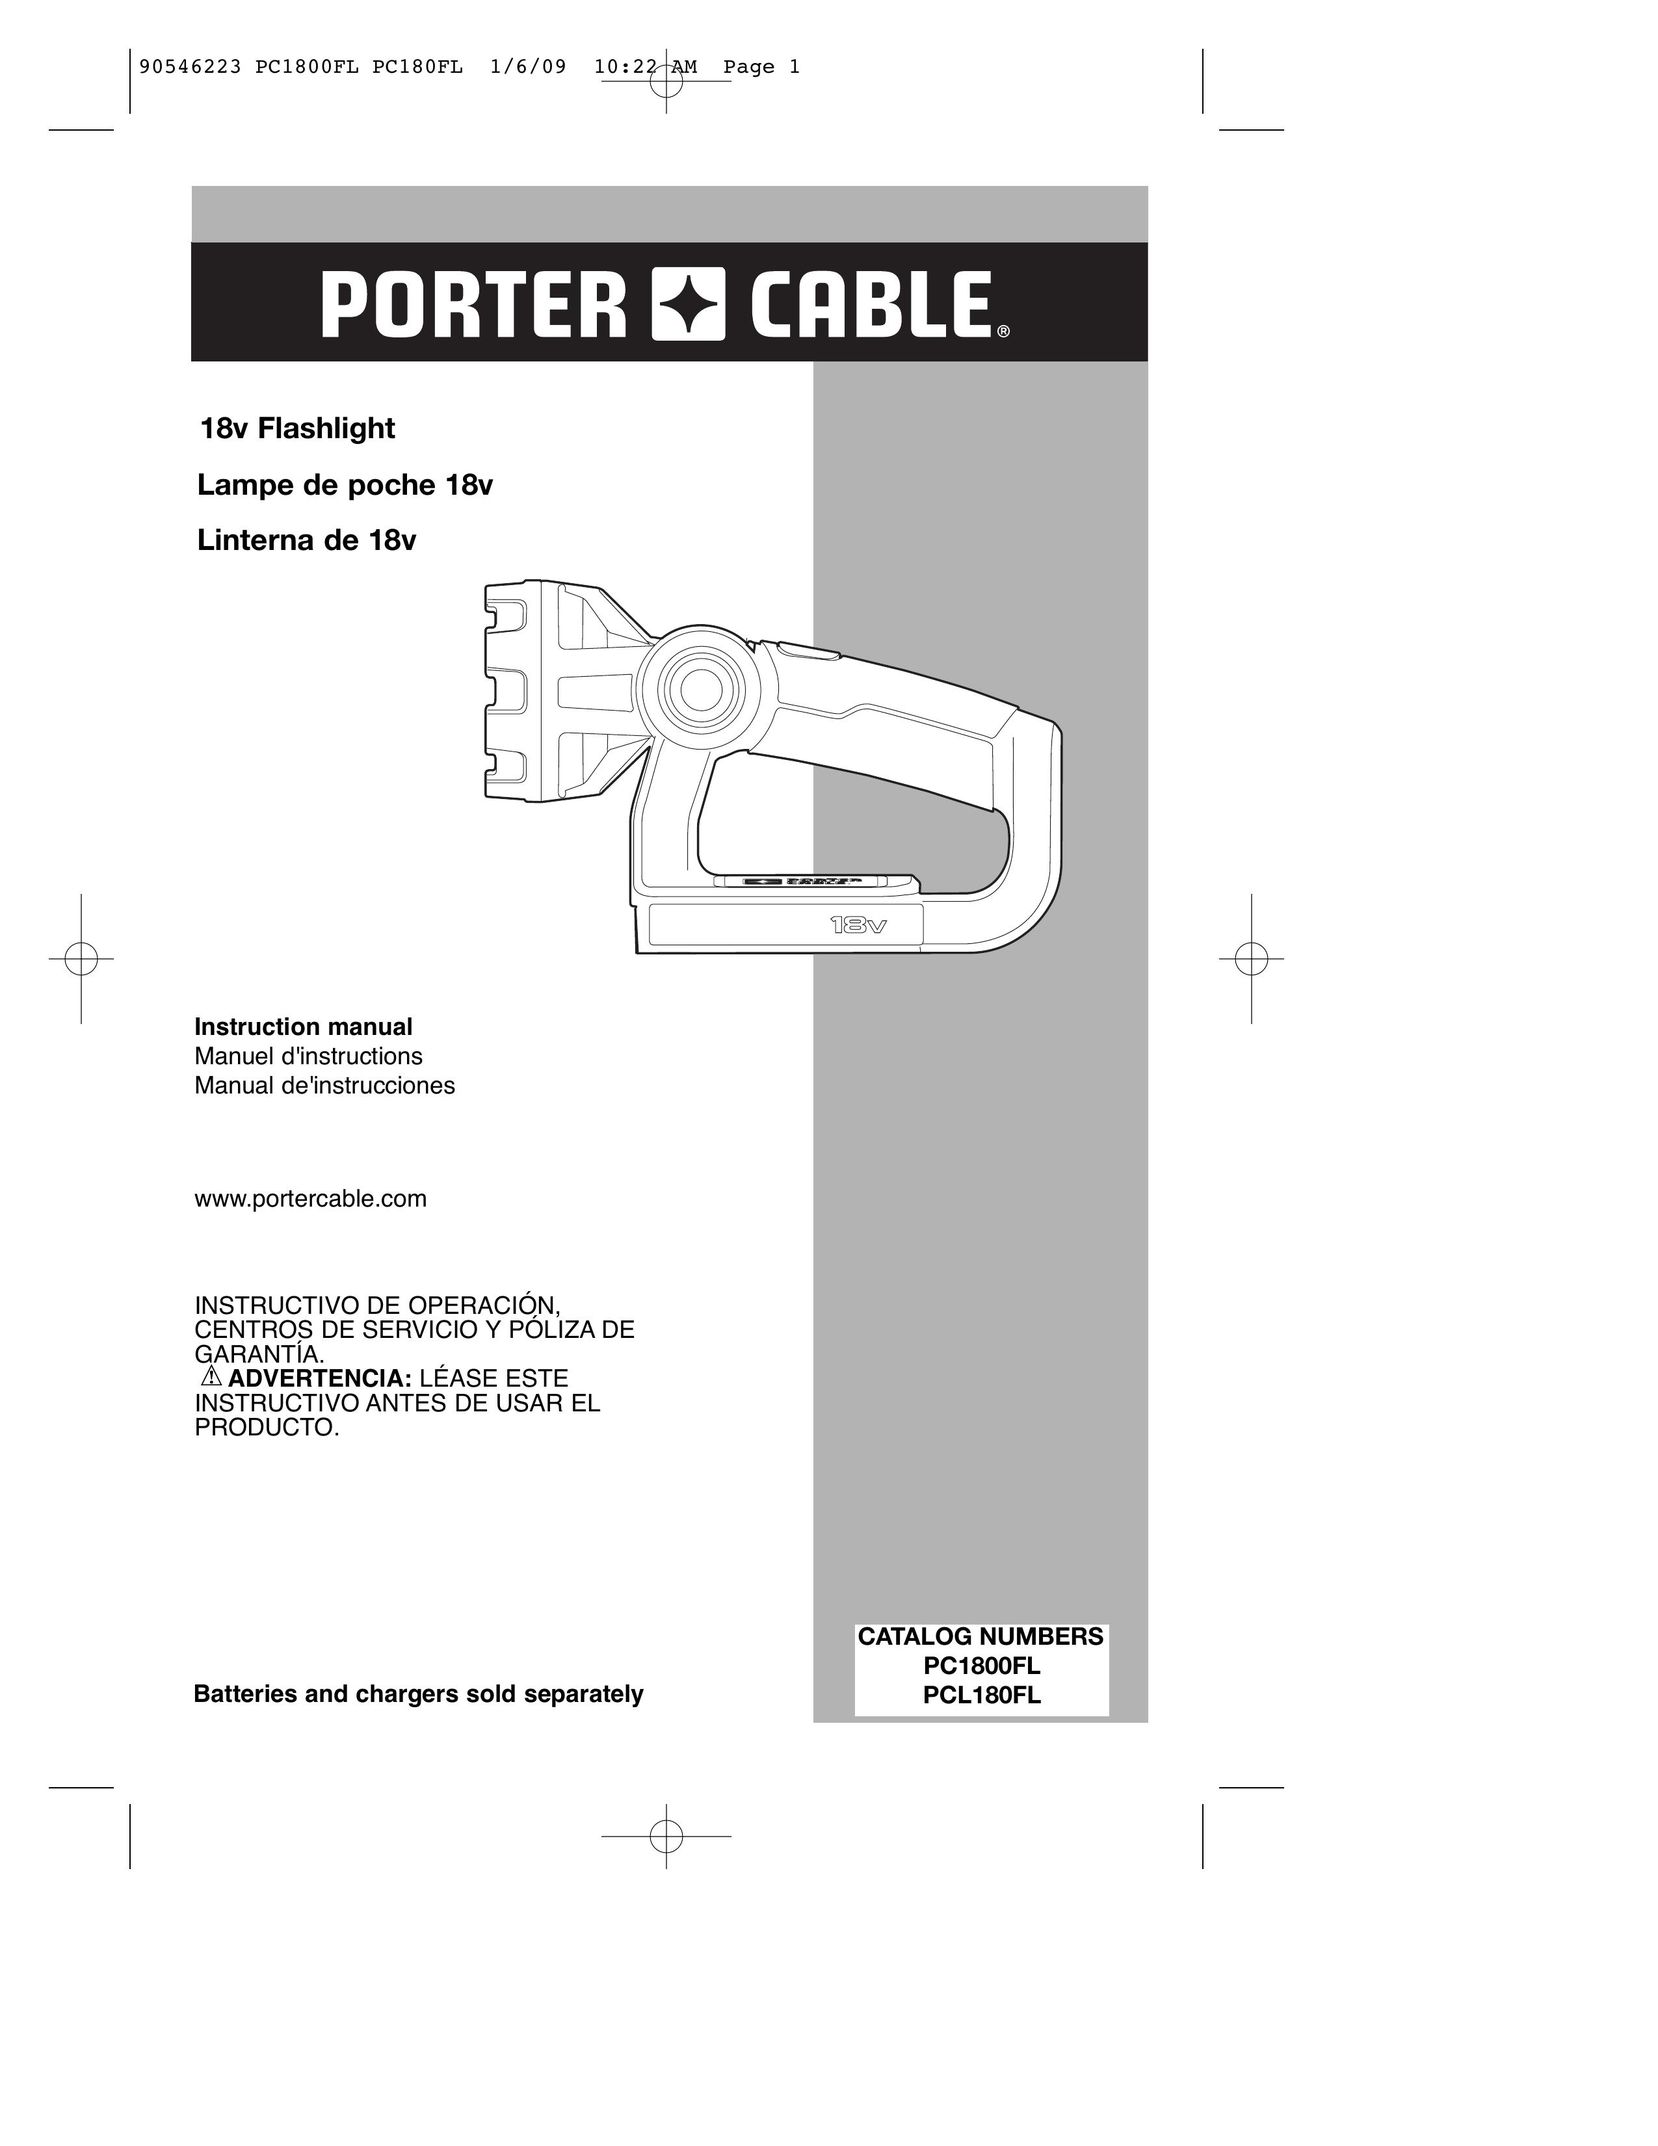 Porter-Cable PCL180FL Home Safety Product User Manual